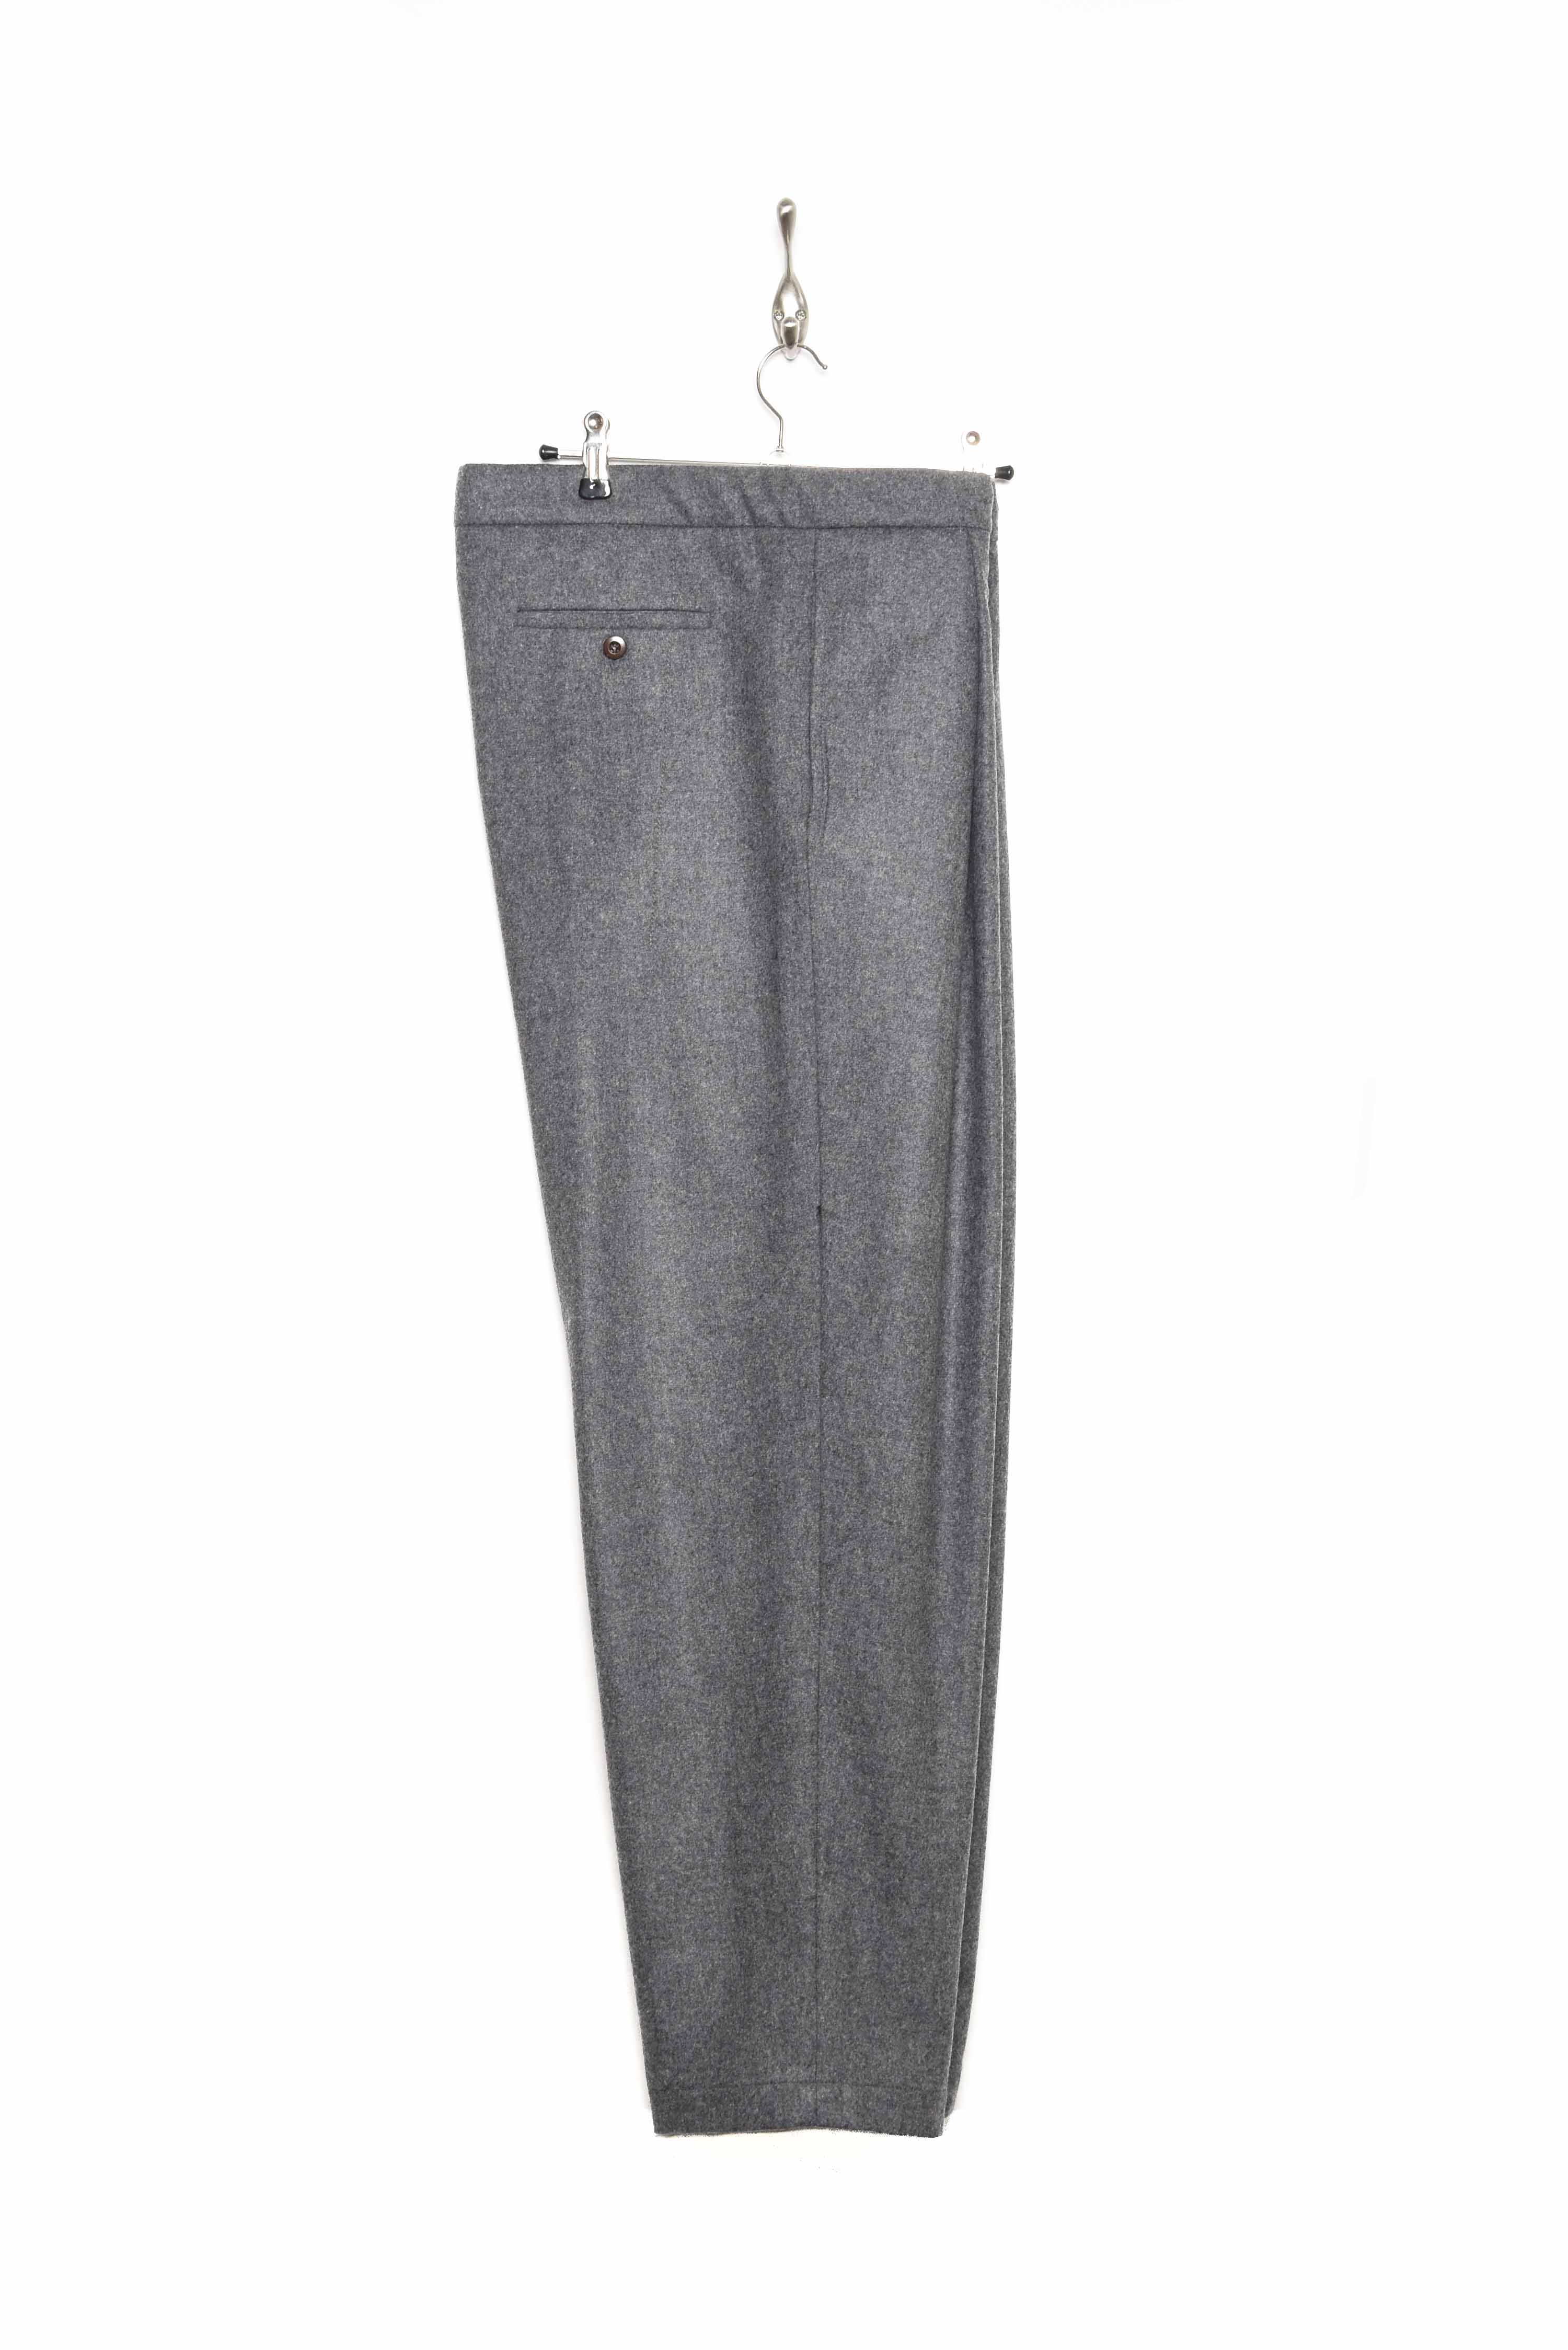 Loden Wool Drawstring Trousers Loden 10 grey 95